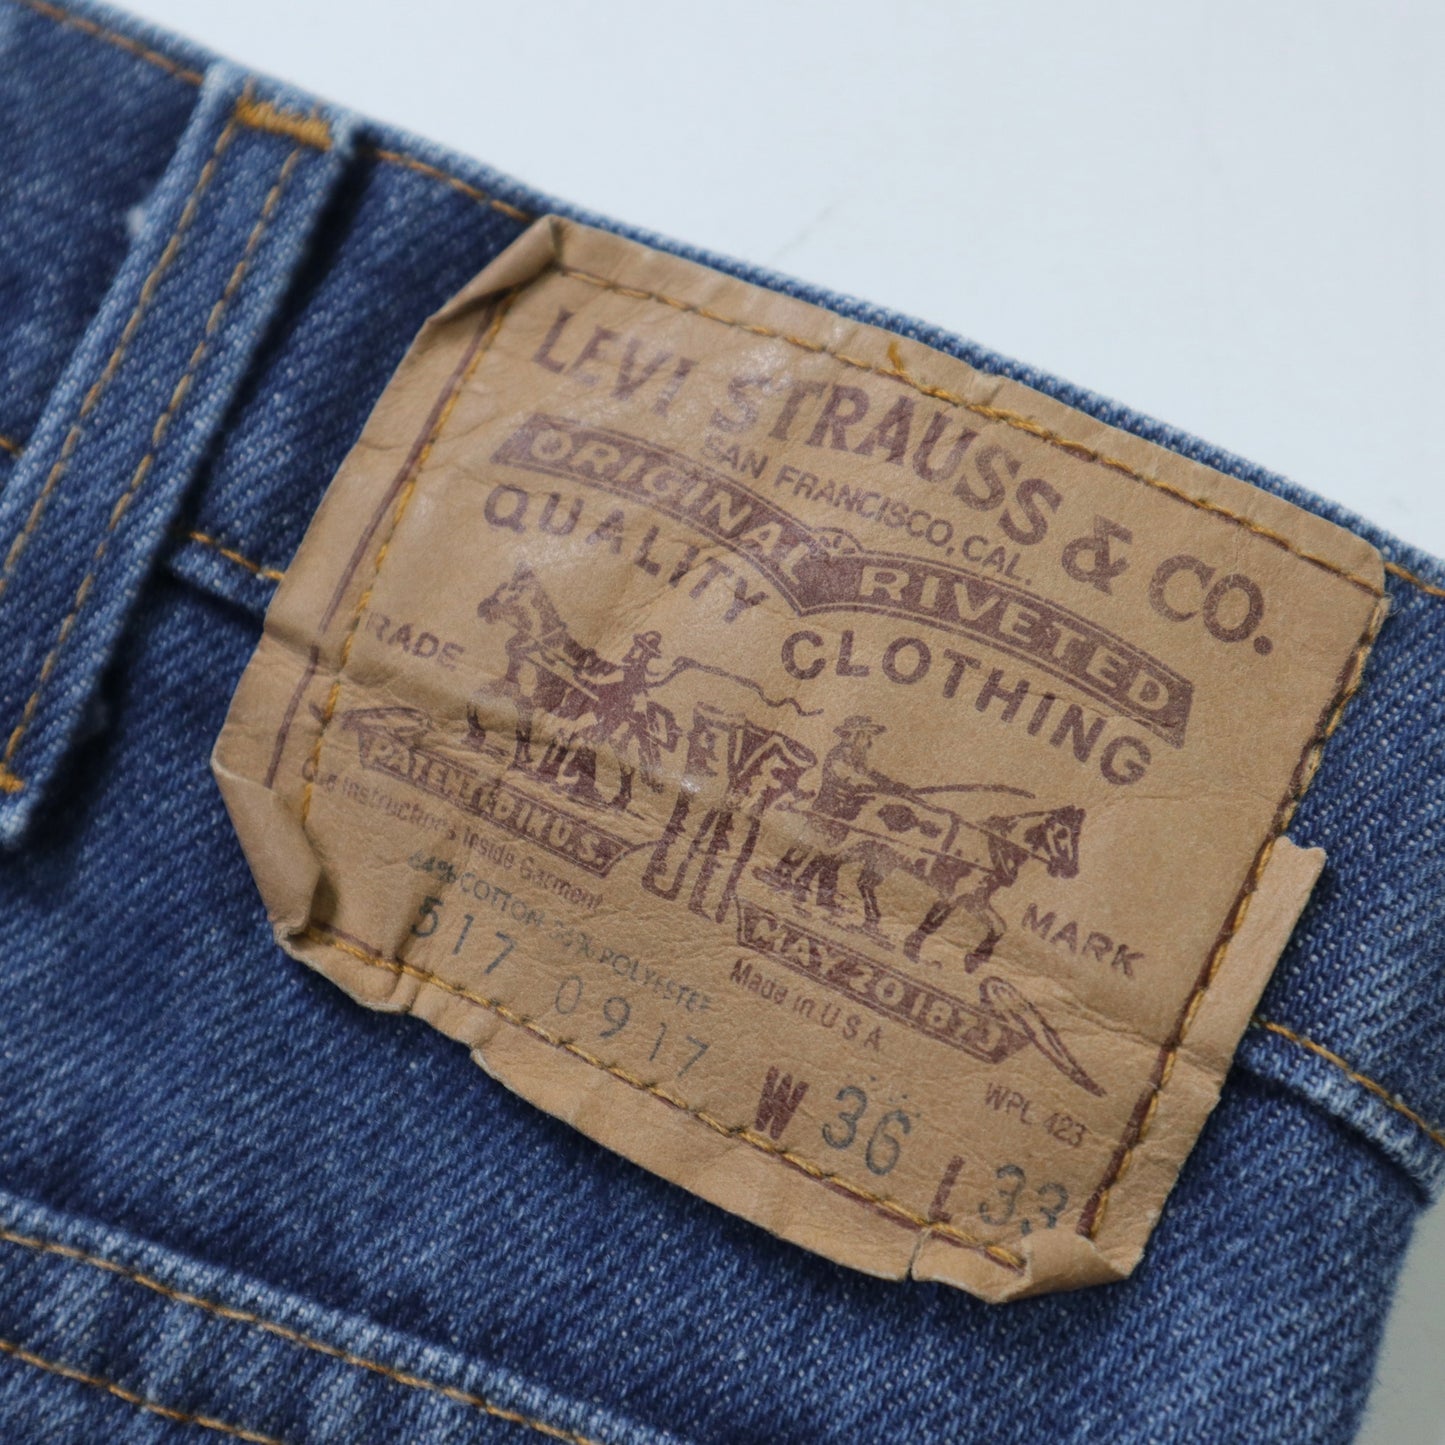 (35W)80s Levi's 517 American-made denim bootcut jeans (517-0917)